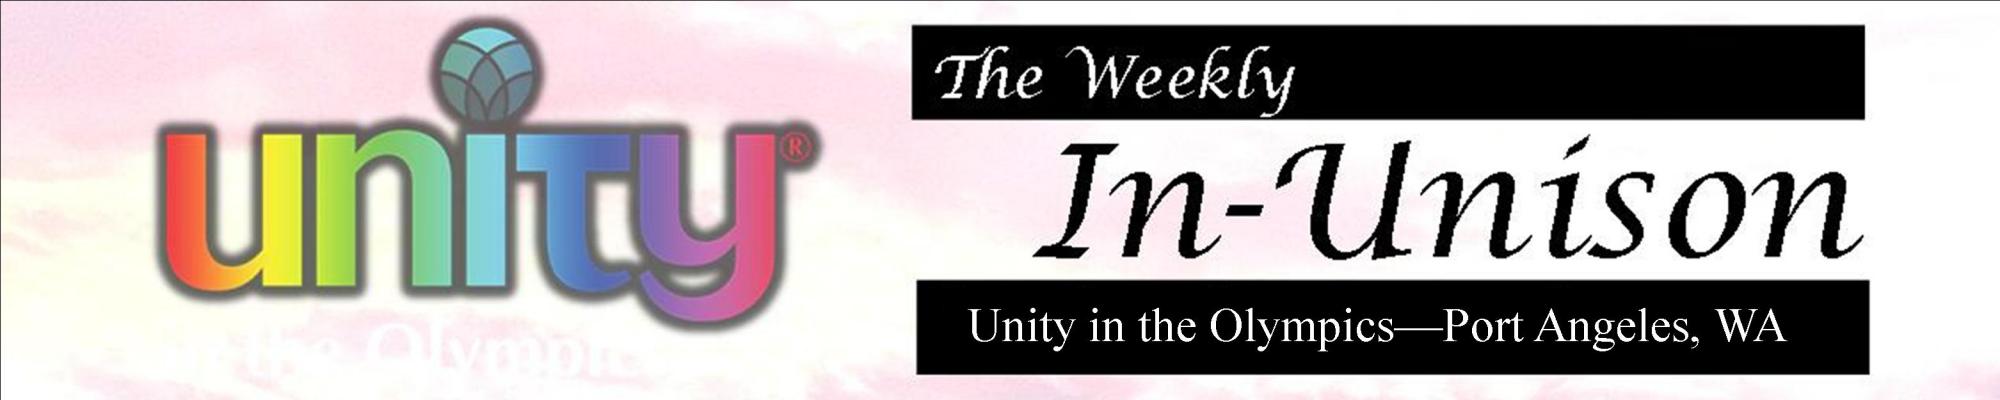 The Weekly IN-UNISON February 21, 2024 Edition